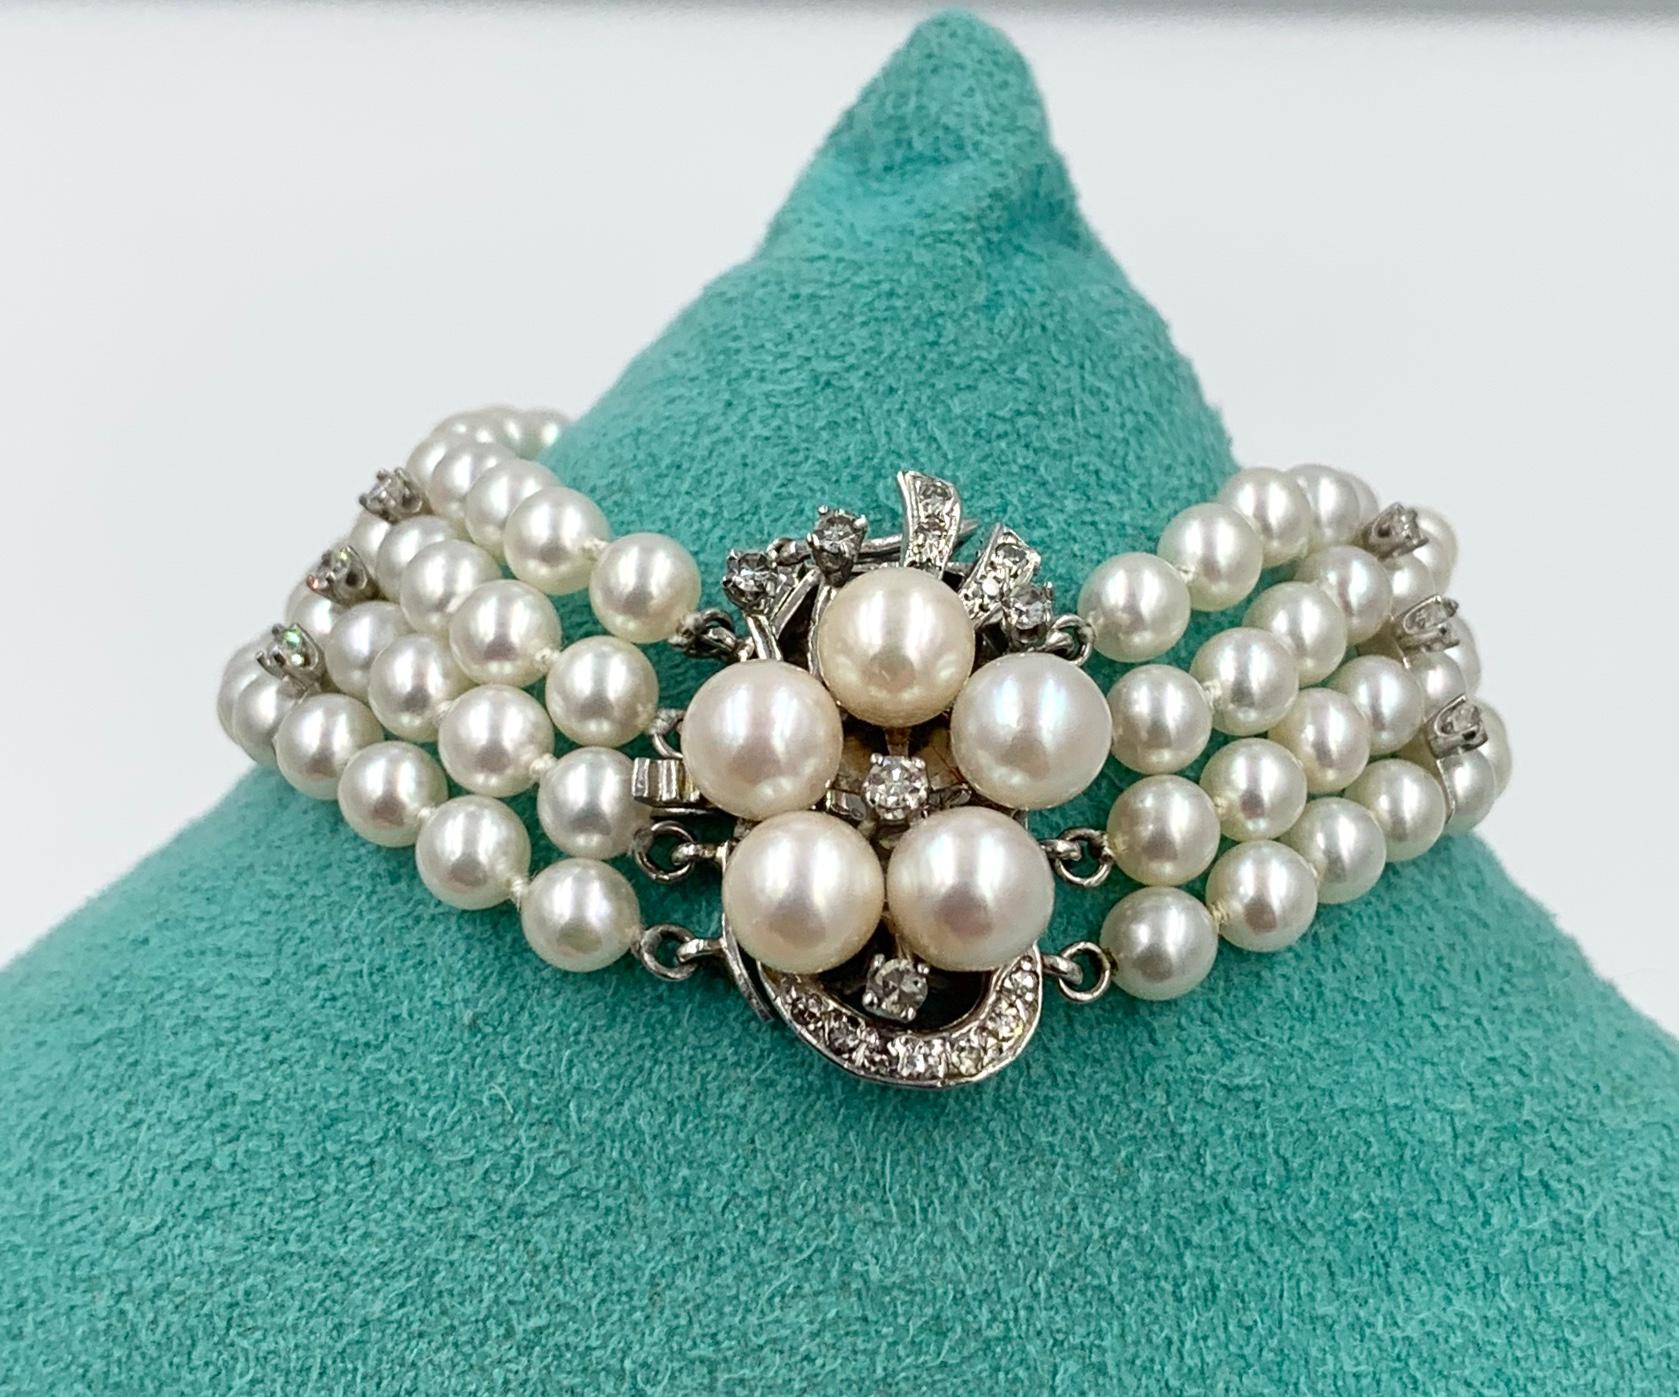 A gorgeous antique Pearl and Diamond Bracelet in 14 Karat White Gold.  The Retro Hollywood Regency jewel is a stunner. 
It has four rows of 4.0-4.5mm White Rose Pearls.  The Pearls are AA rated and very beautiful.  The Pearls have 3 white gold knife